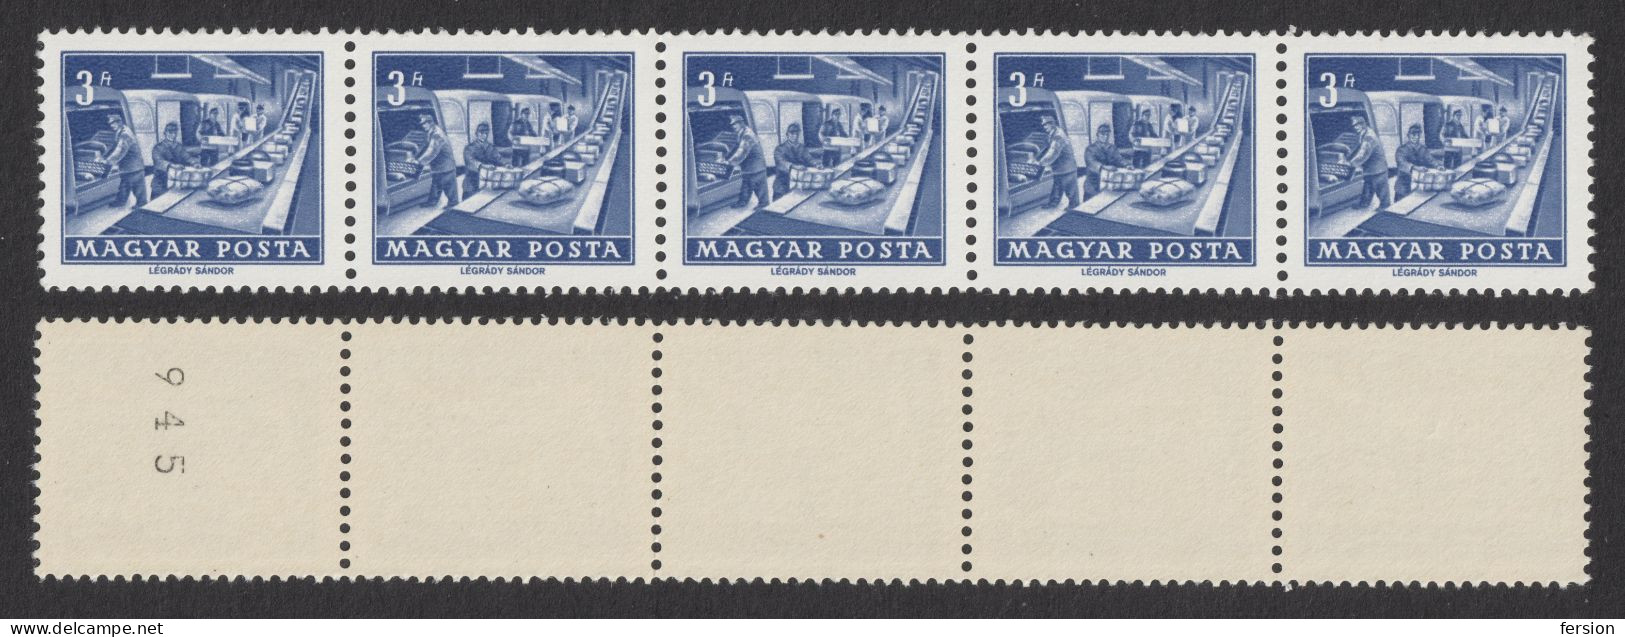 Parcel Post PACKET VAN TRUCK Postman 1963 1972 HUNGARY Roll Coil Automat Automatic Automata STAMP Numbered - Used - Correo Postal